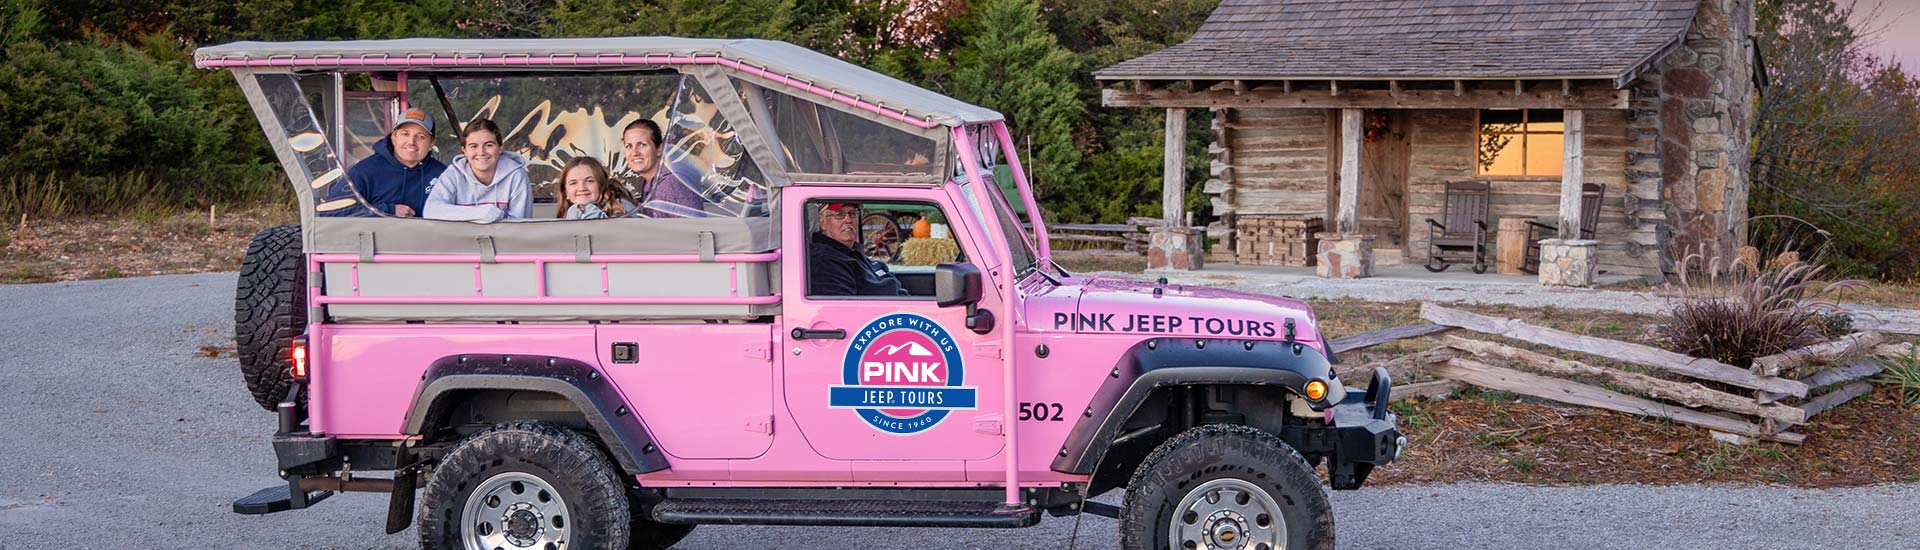 Tour guests smiling from the back of a Pink Jeep Wrangler parked in front of historic log cabin at sunset, Pink Jeep Tours Branson.